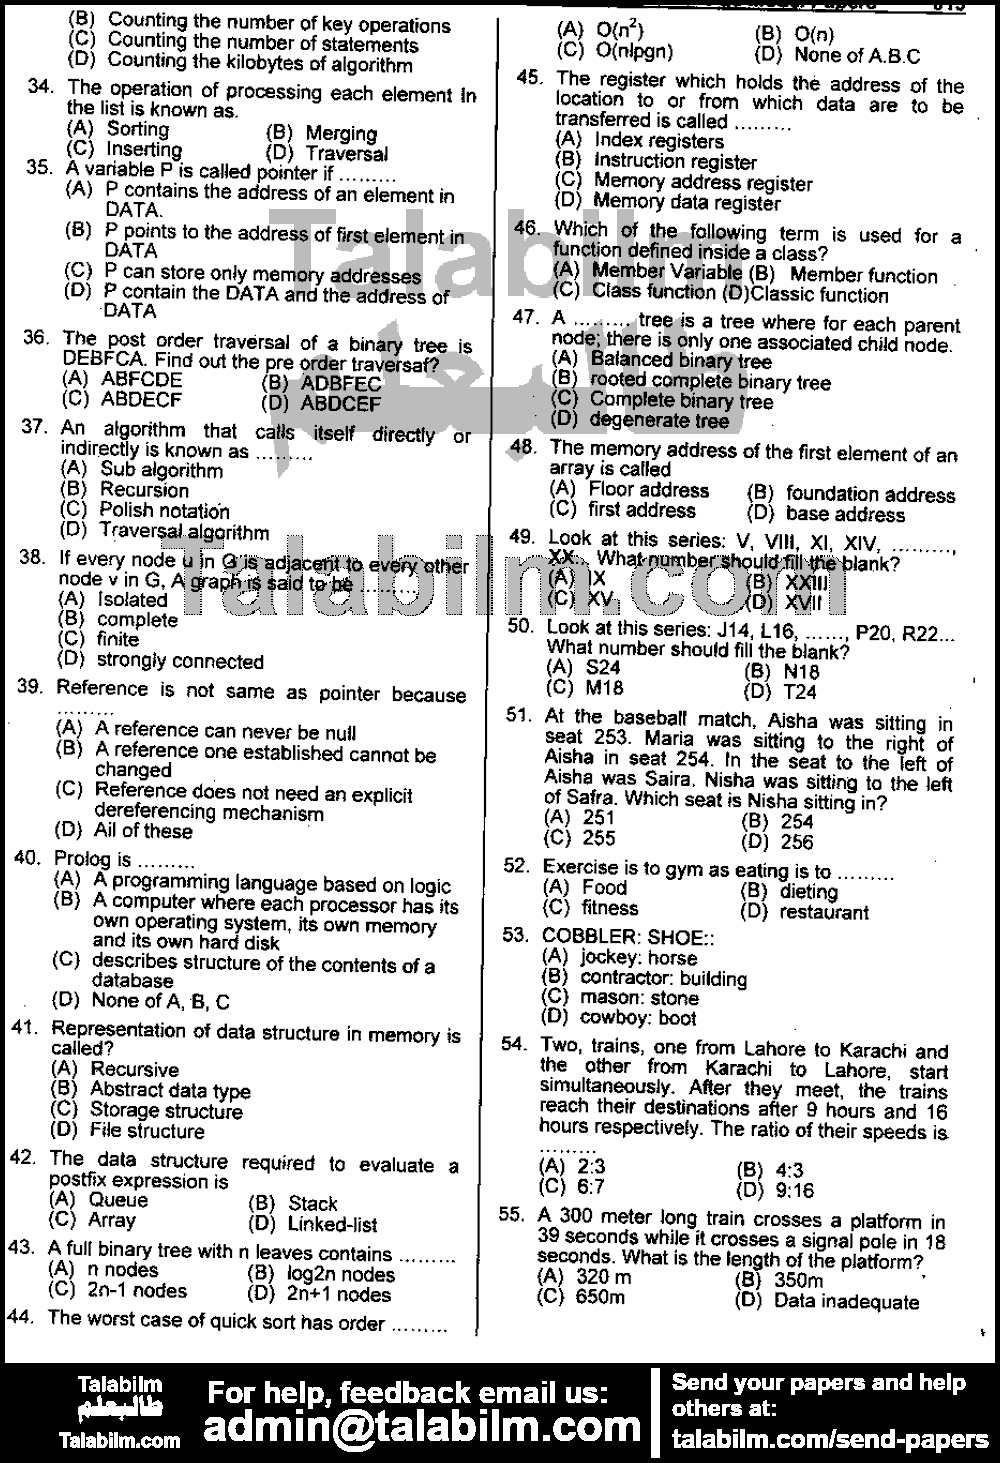 Computer Programmer Or Data Control Officer 0 past paper for 2015 Page No. 3